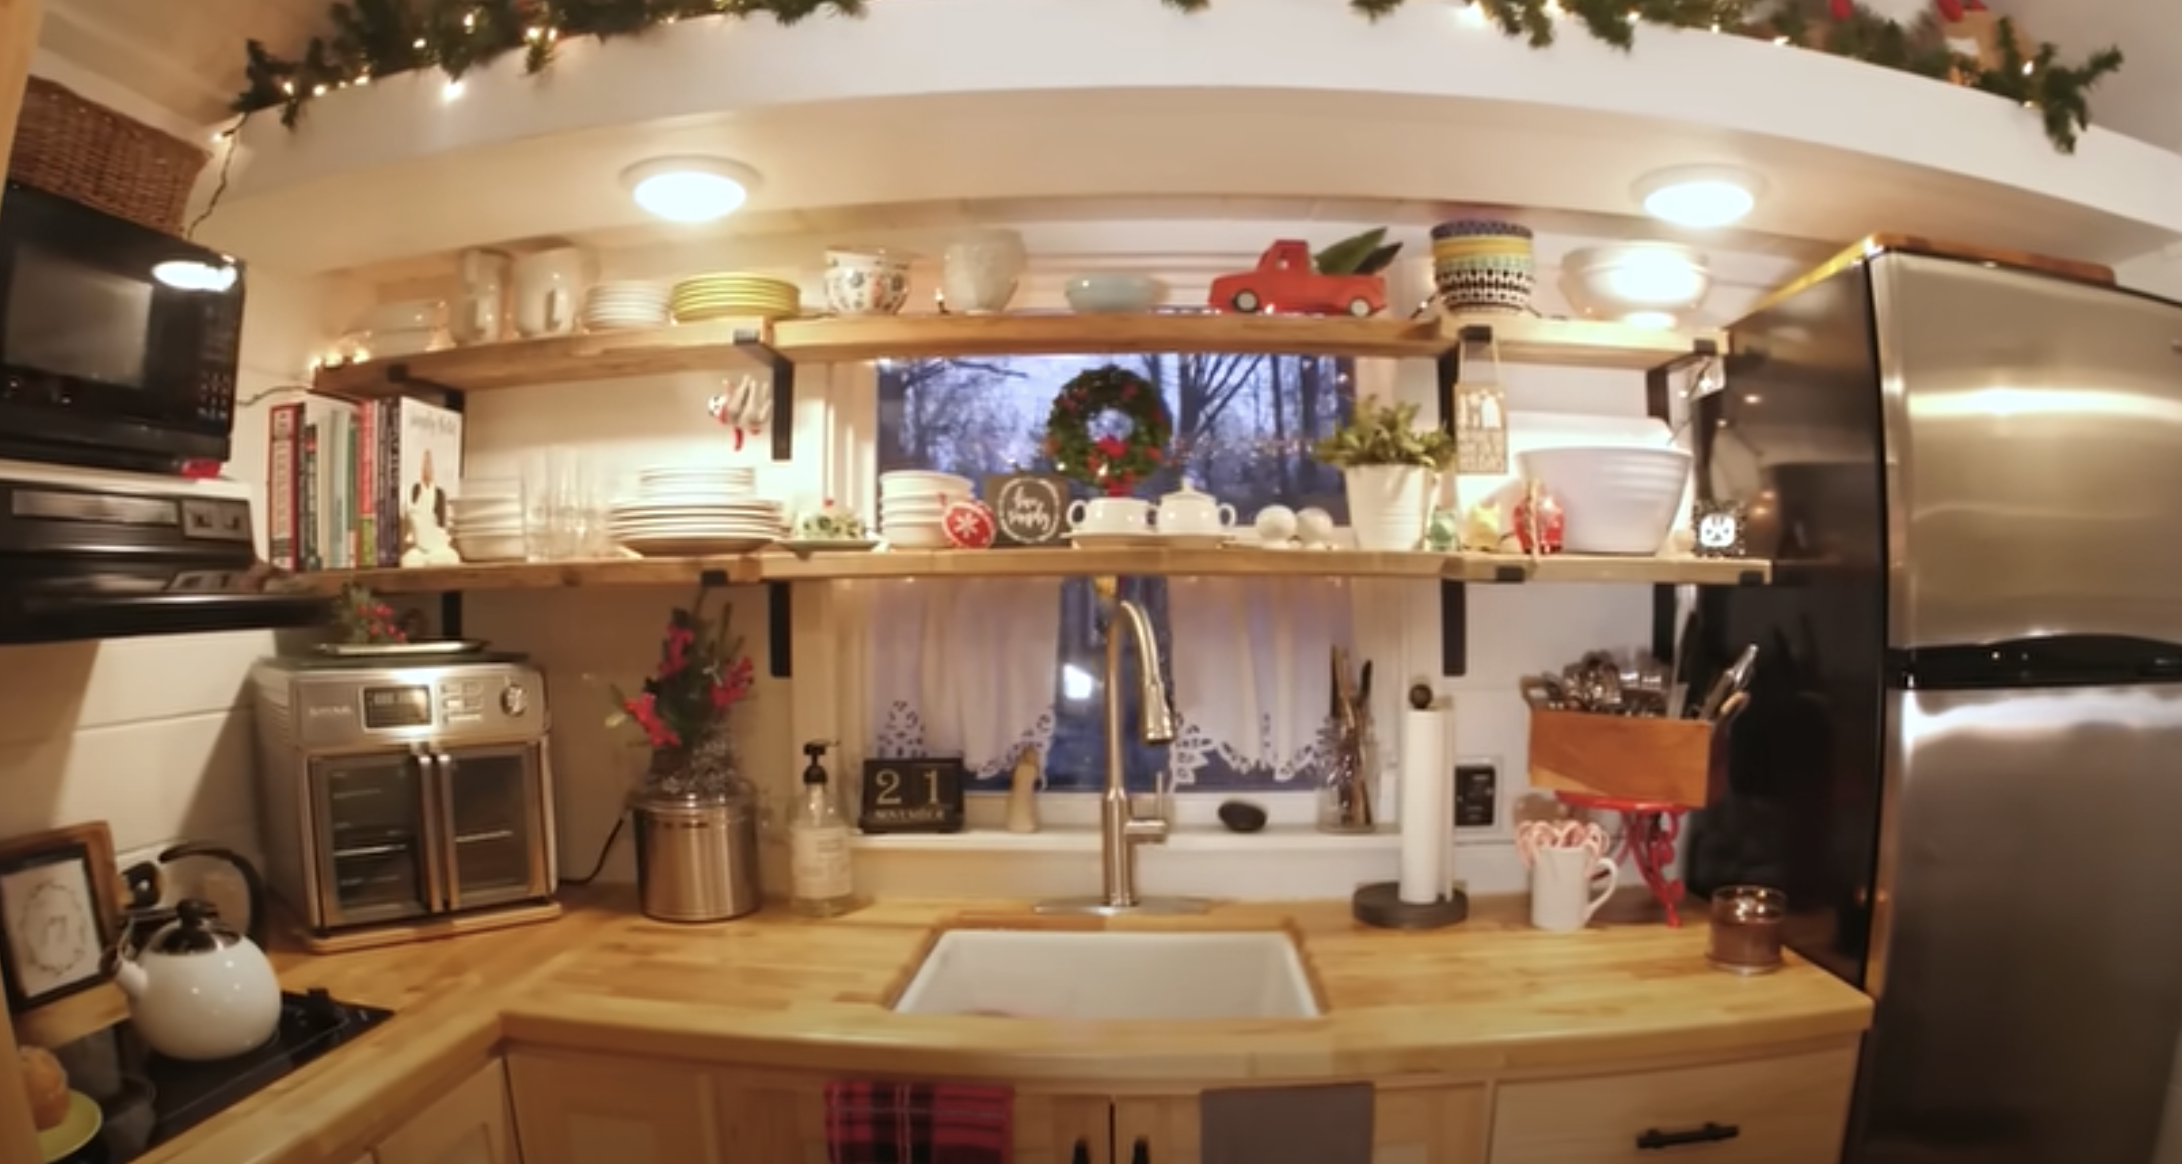 tiny house tiny kitchen with shelves, sink and kitchen appliances